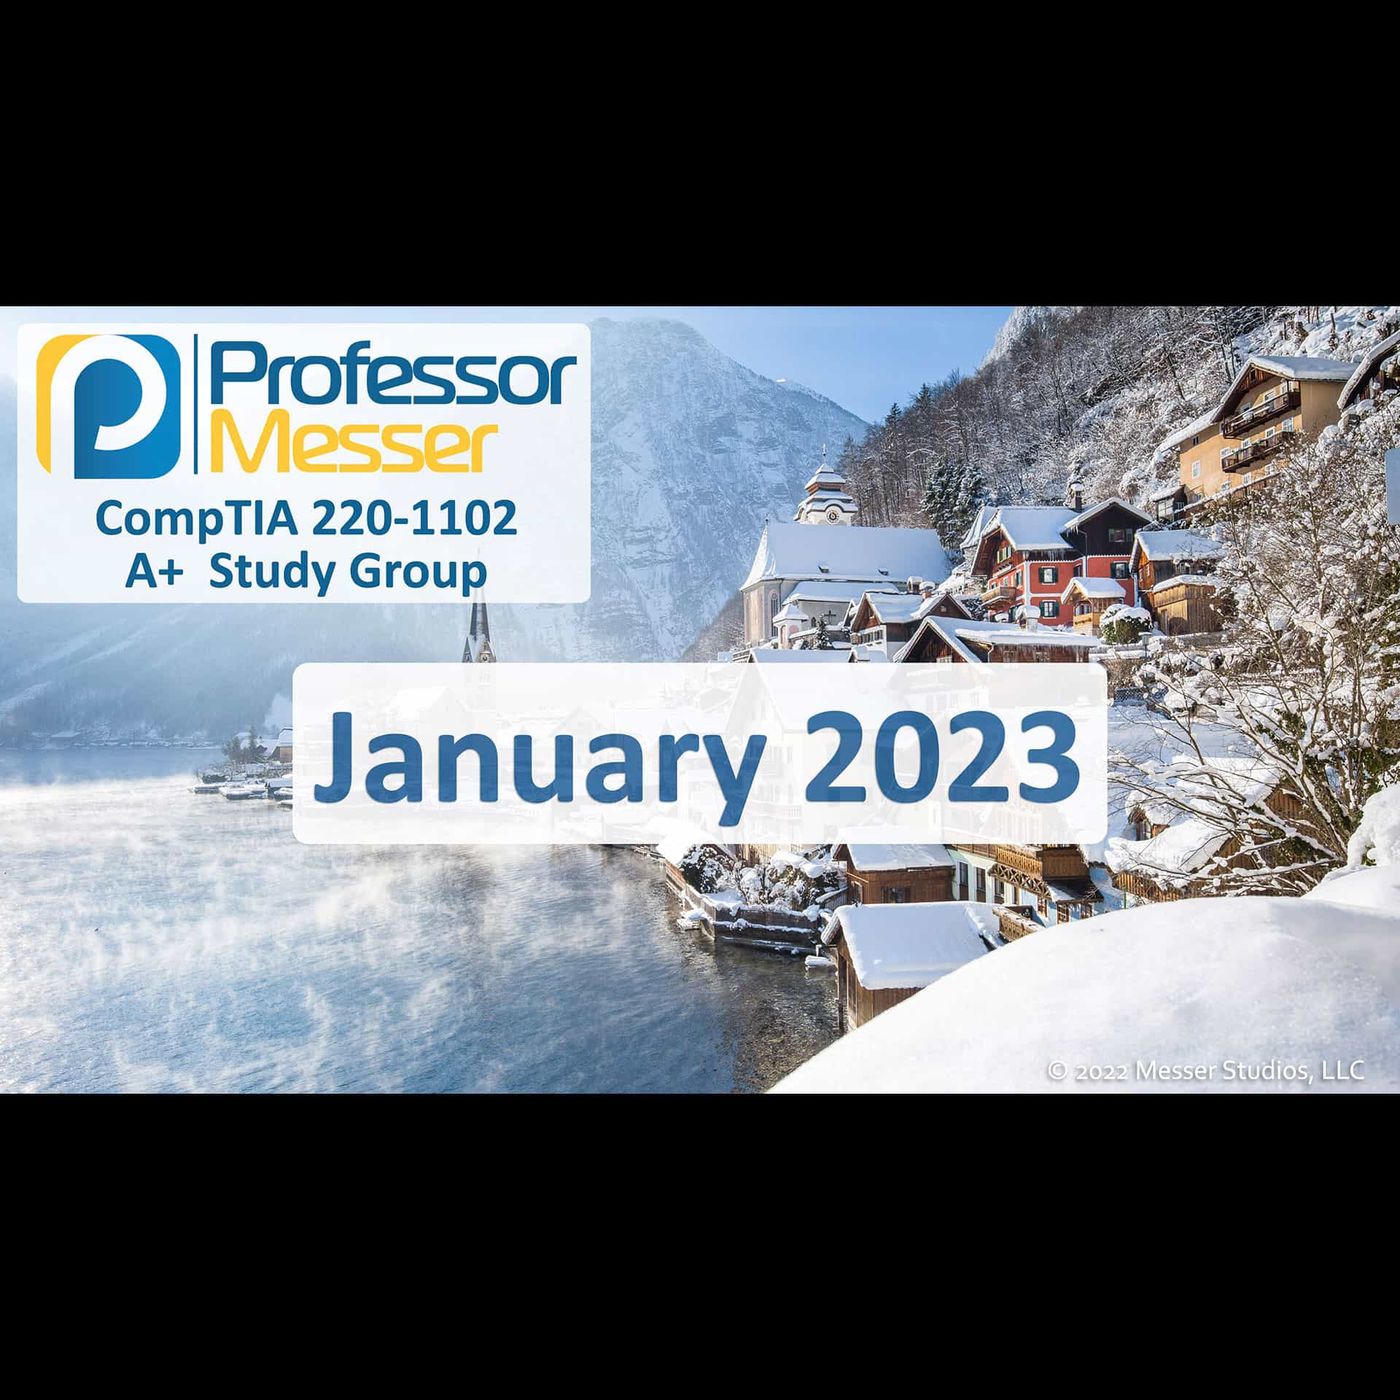 Professor Messer's CompTIA 220-1102 A+ Study Group After Show - January 2023